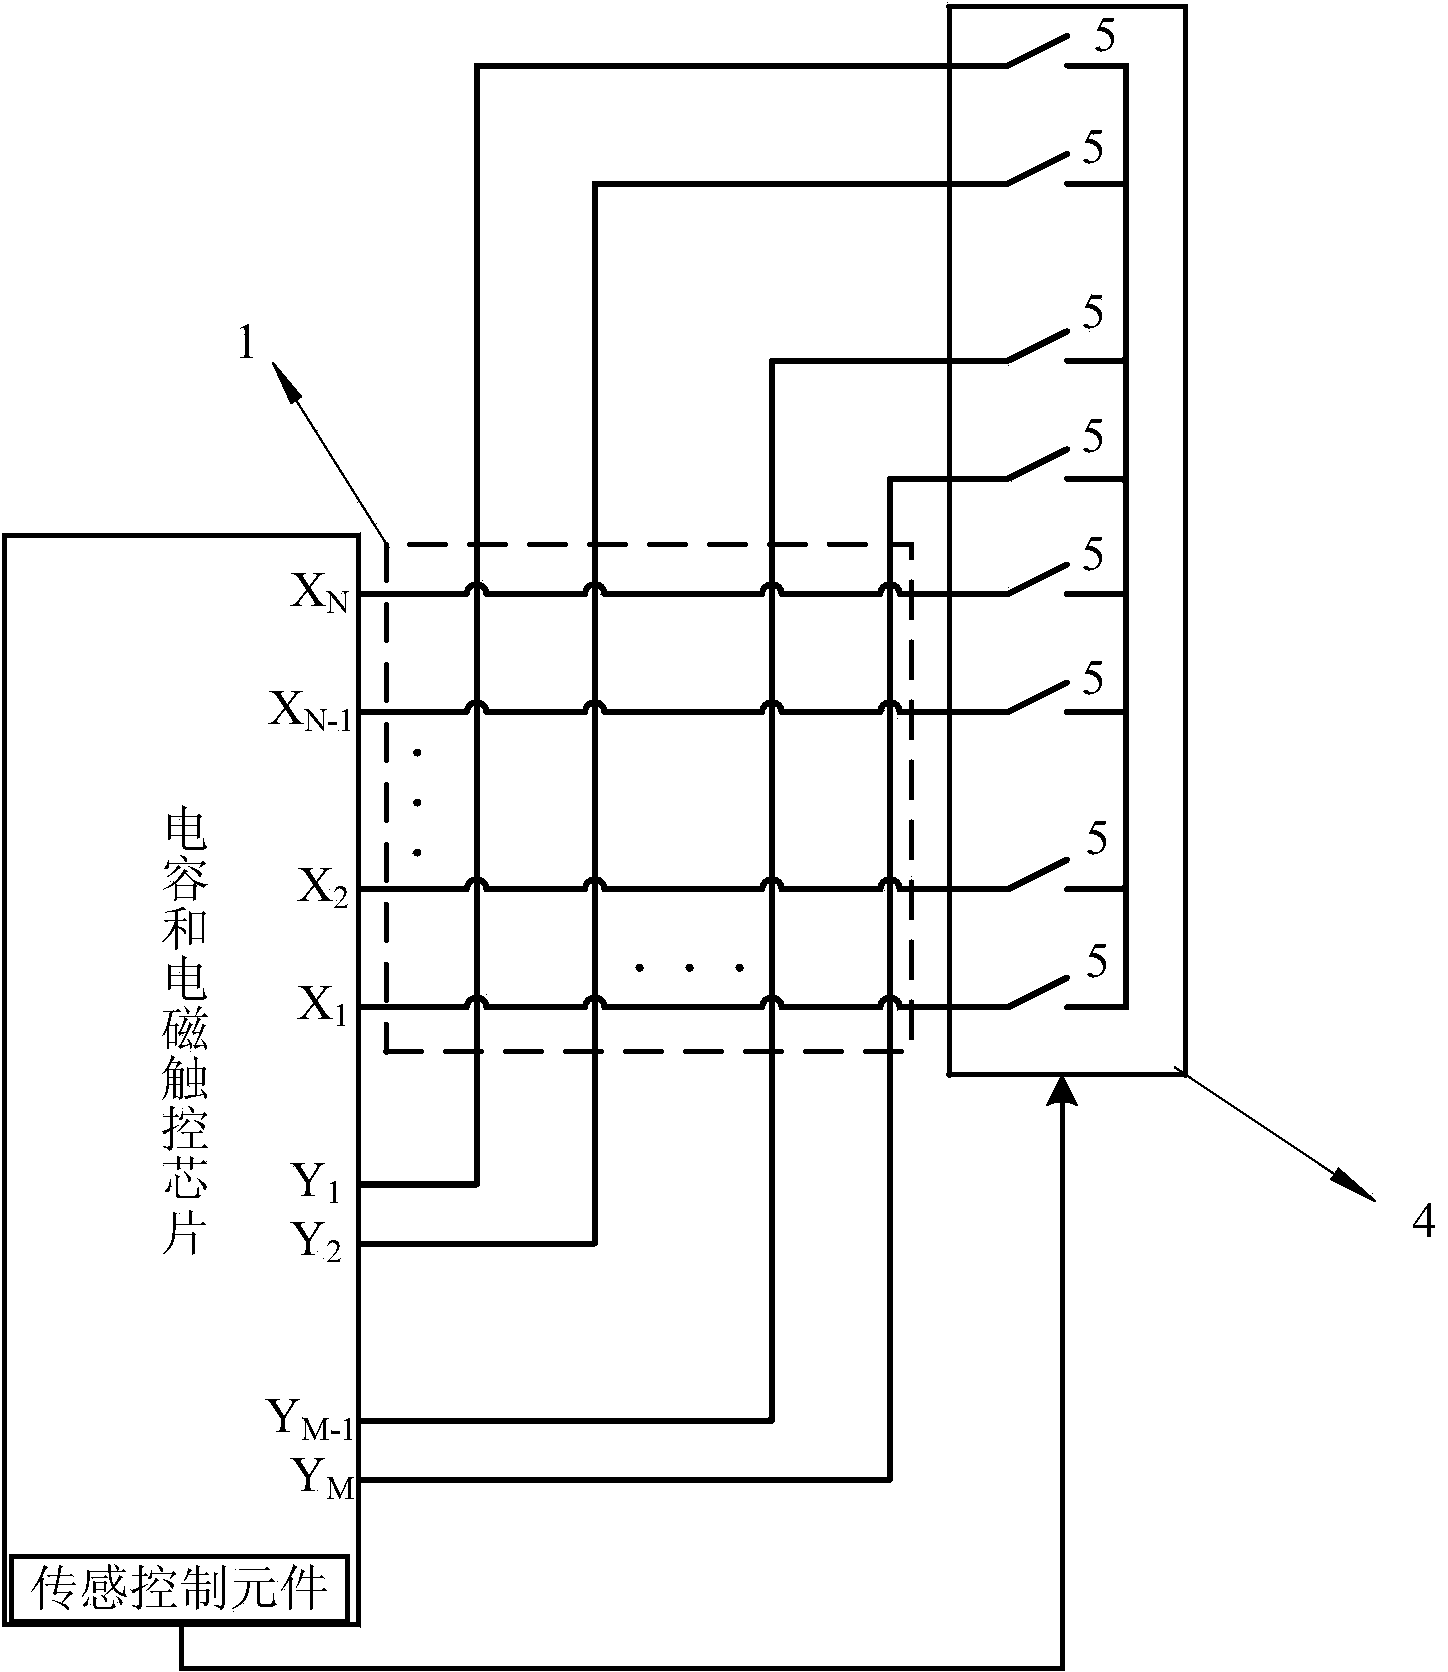 System for achieving capacitance detection and electromagnetic detection